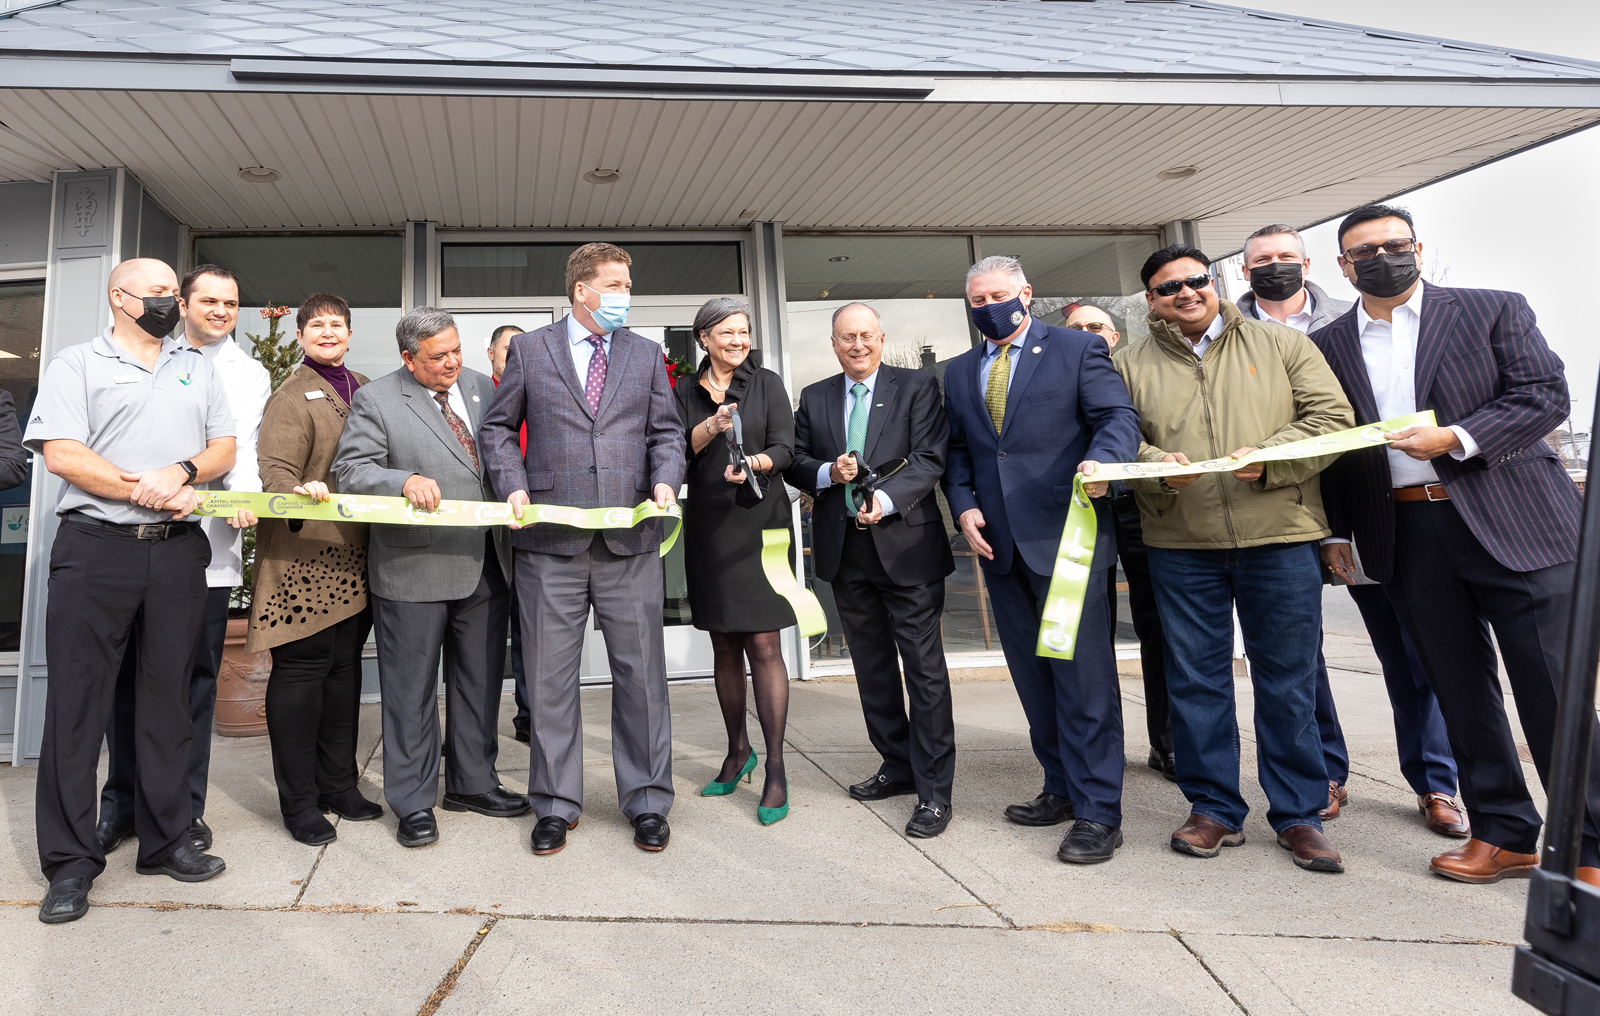 Ribbon cutting ceremony at ConnectRx Hometown - Watervliet, NY.